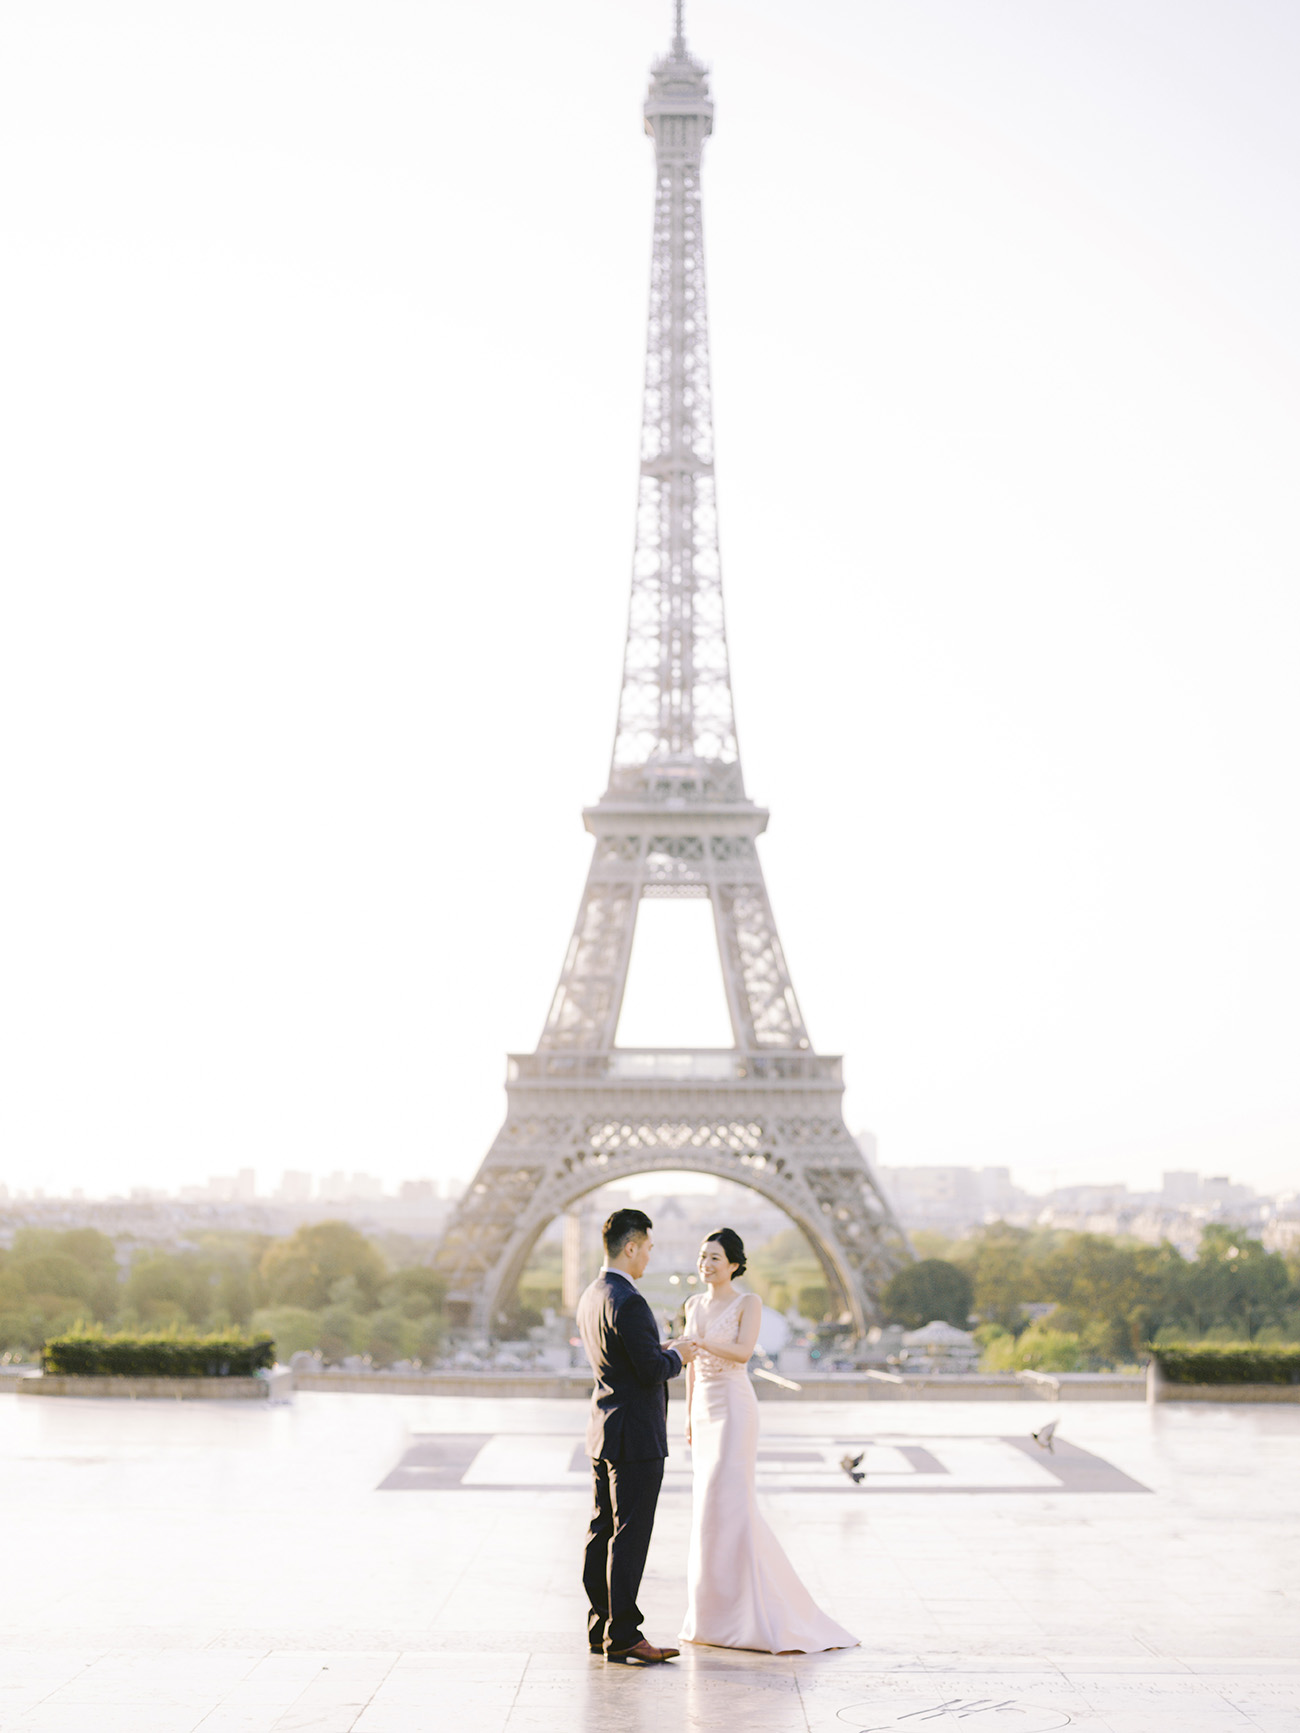 Happy couple celebrating their love with a kiss in front of the iconic Eiffel Tower. Perfect inspiration for any intimate wedding